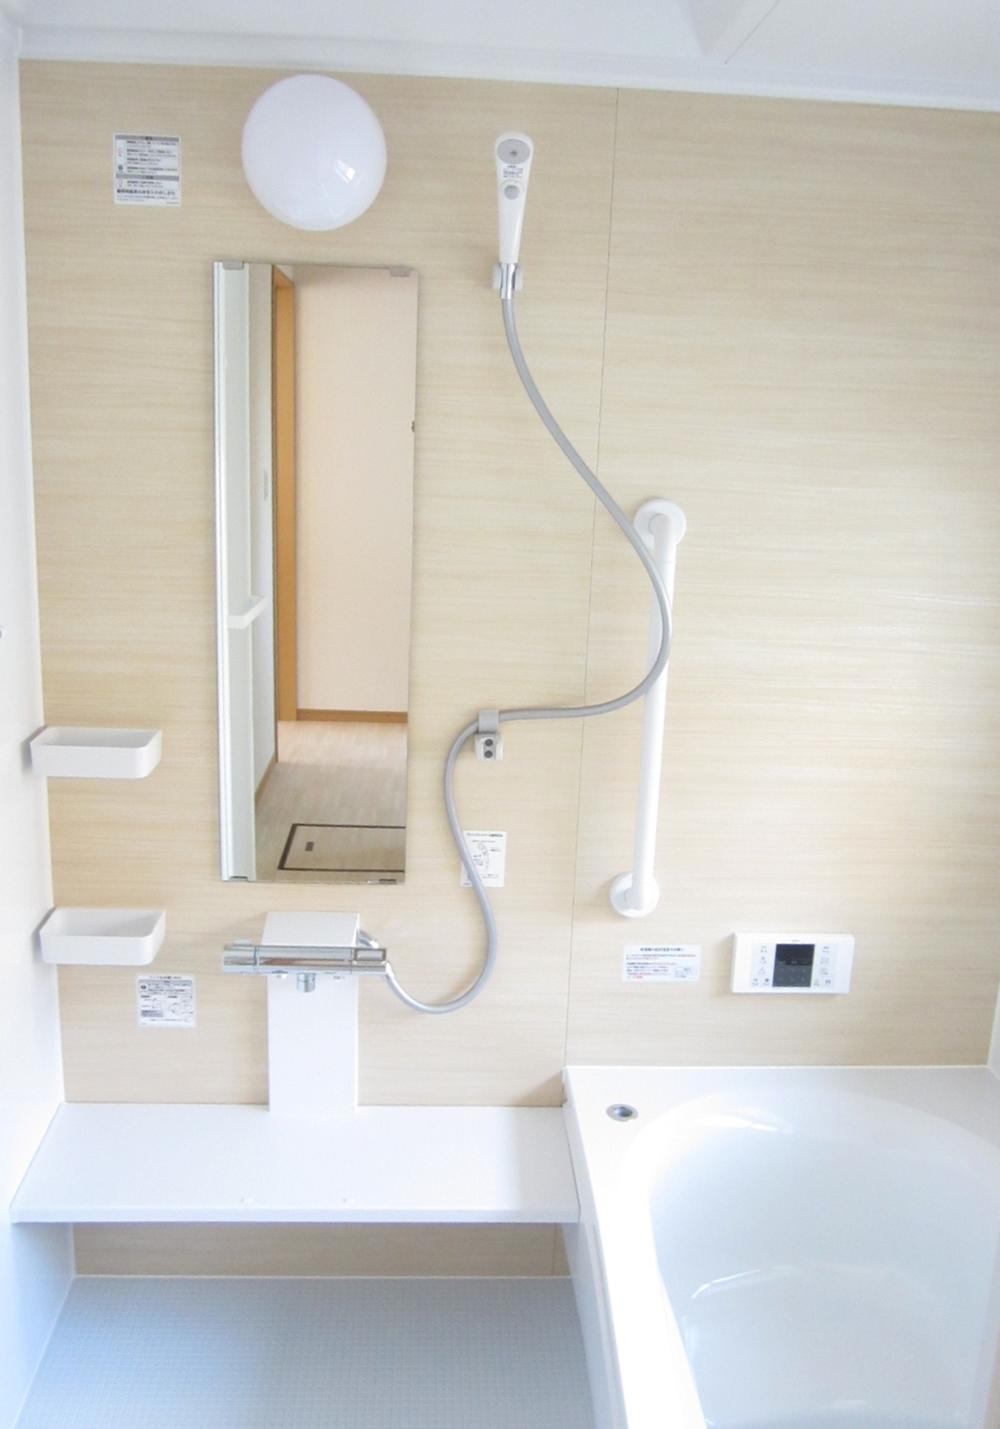 Same specifications photo (bathroom). Example of construction toilet ・ With handrail stairs